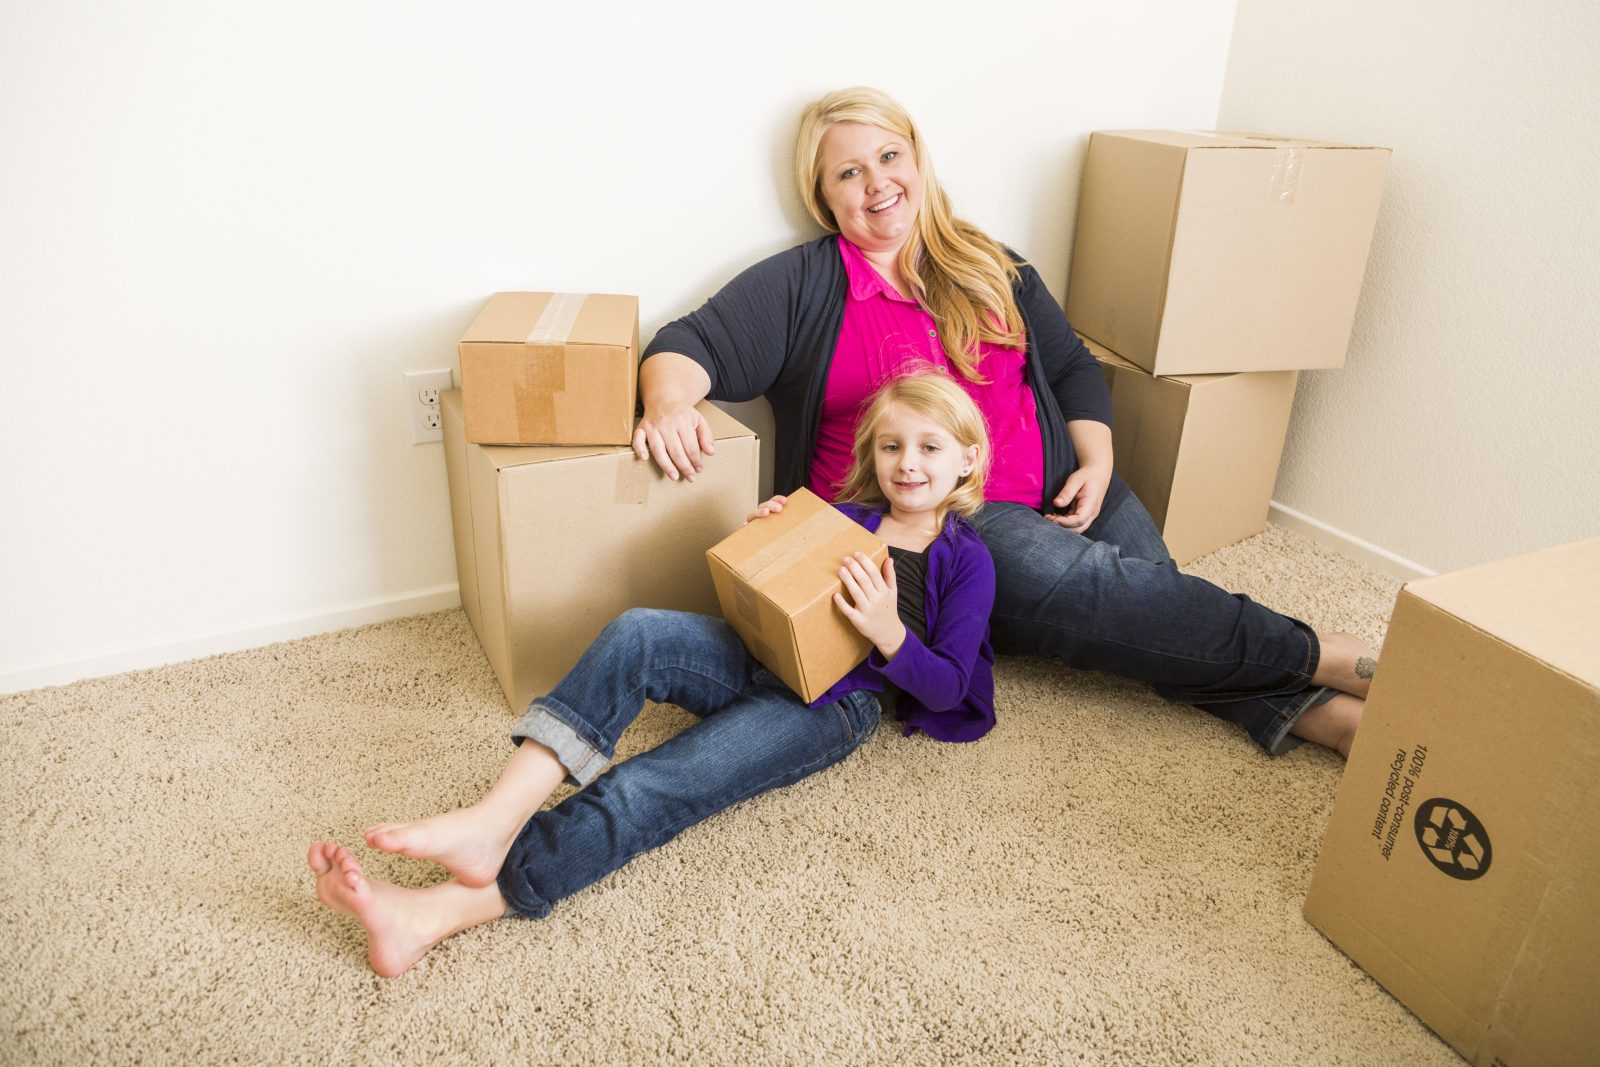 A single mom and her daughter unpack boxes in their new house.